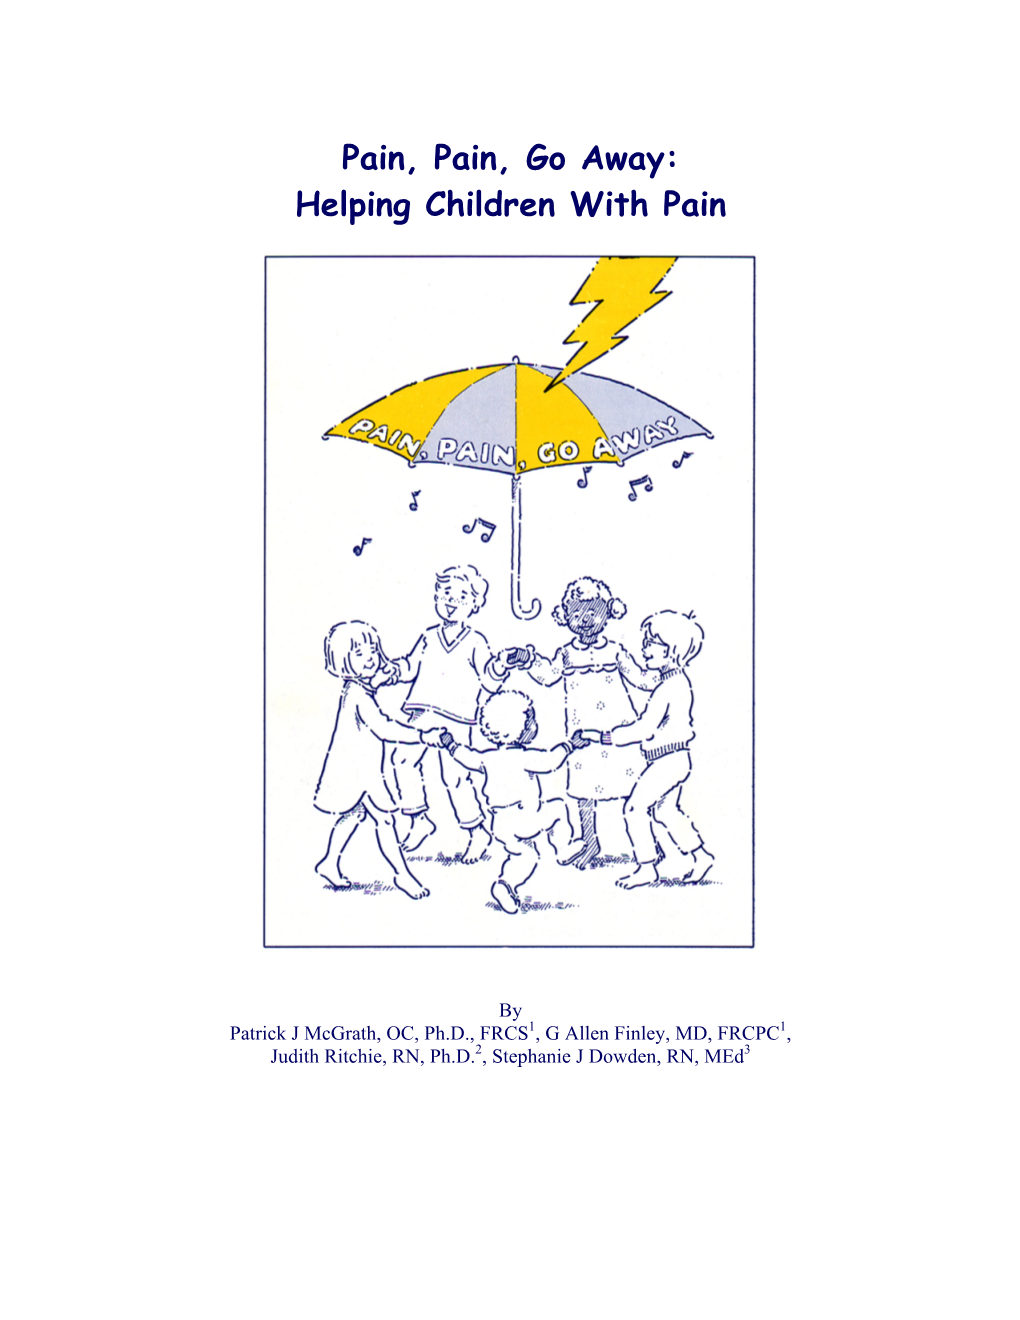 Pain, Pain, Go Away: Helping Children with Pain